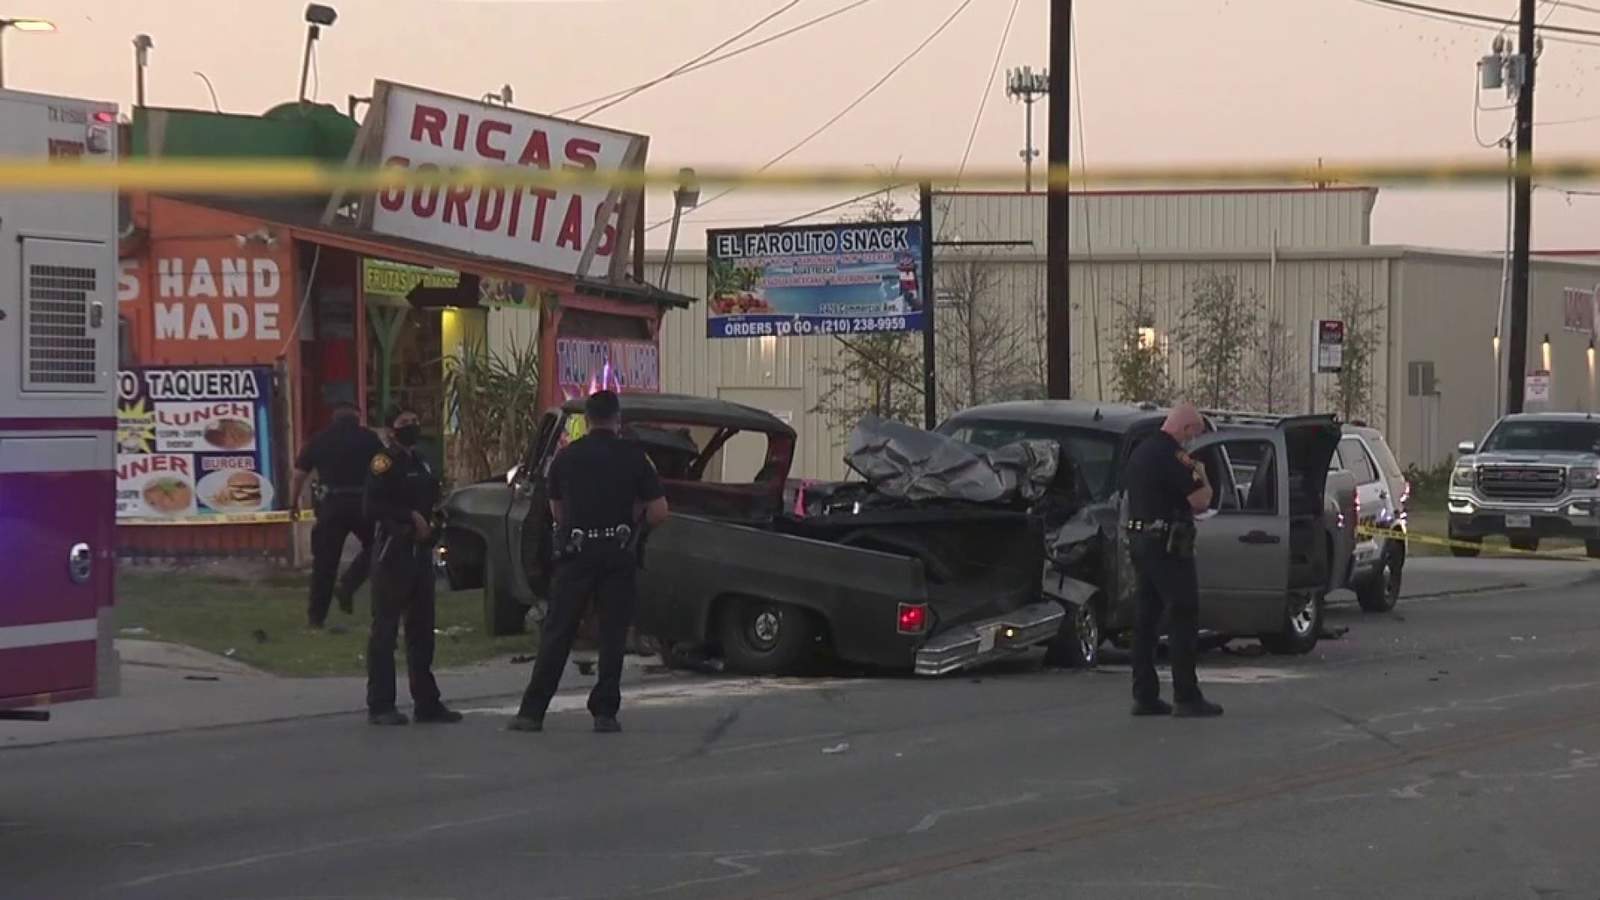 Community members, shop workers recall fatal wreck outside of Southside shop